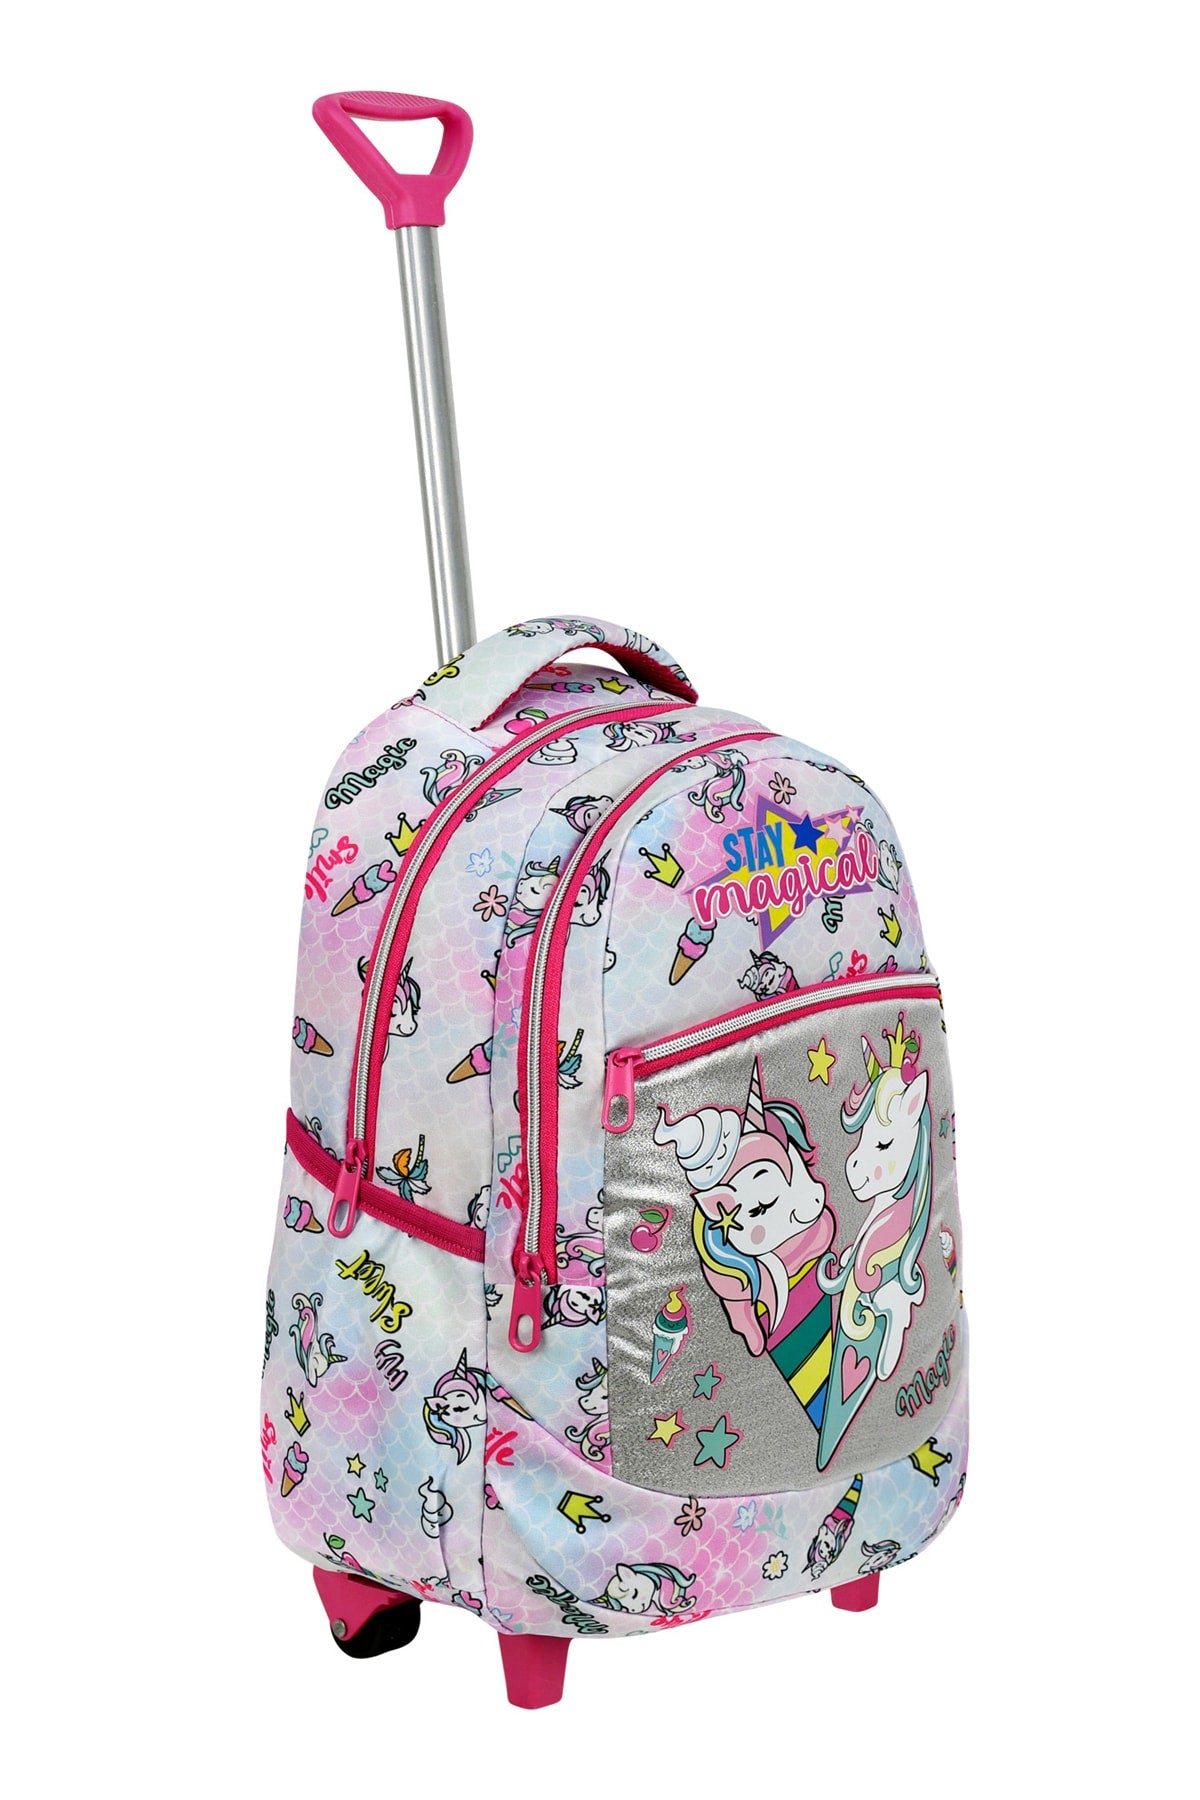 Blue Unicorn Pattern Primary School Bag + Lunch Box with Squeegee